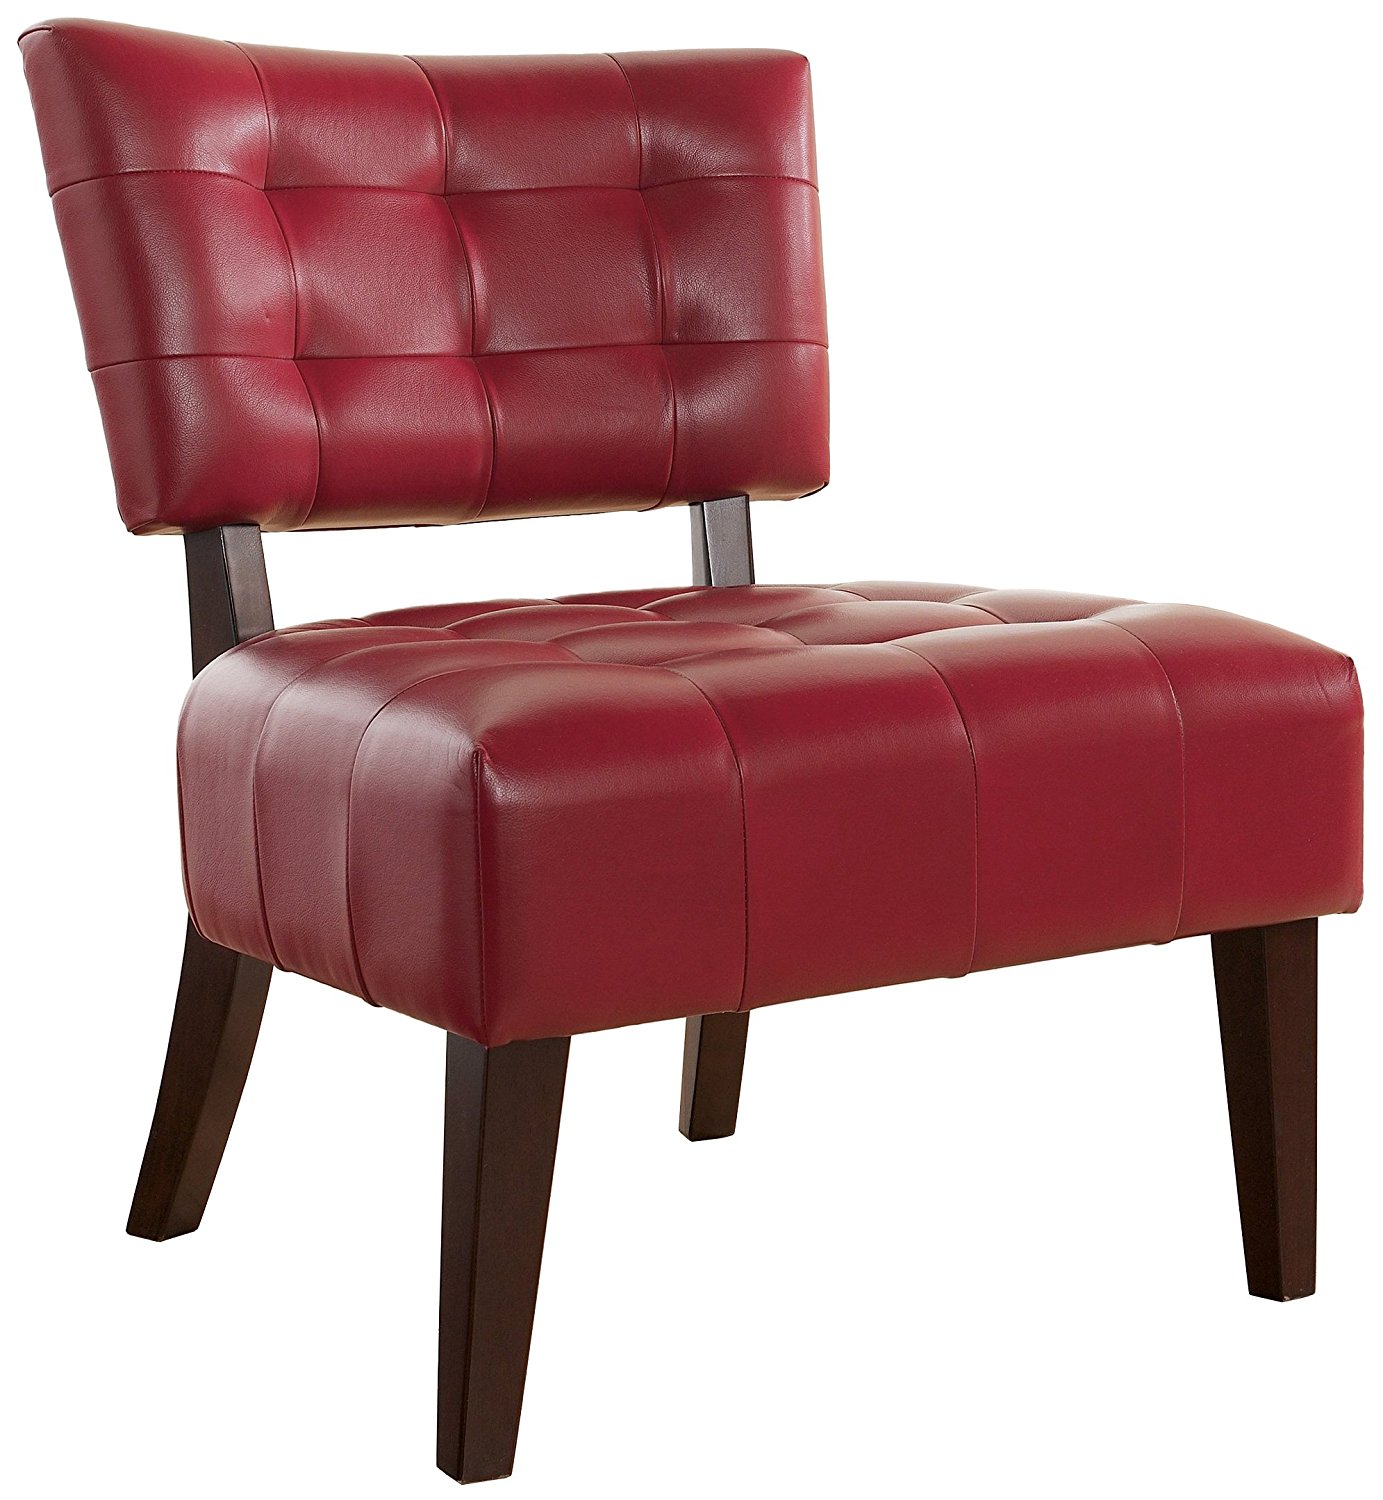 Roundhill Furniture Blended Leather Tufted Accent Chair 